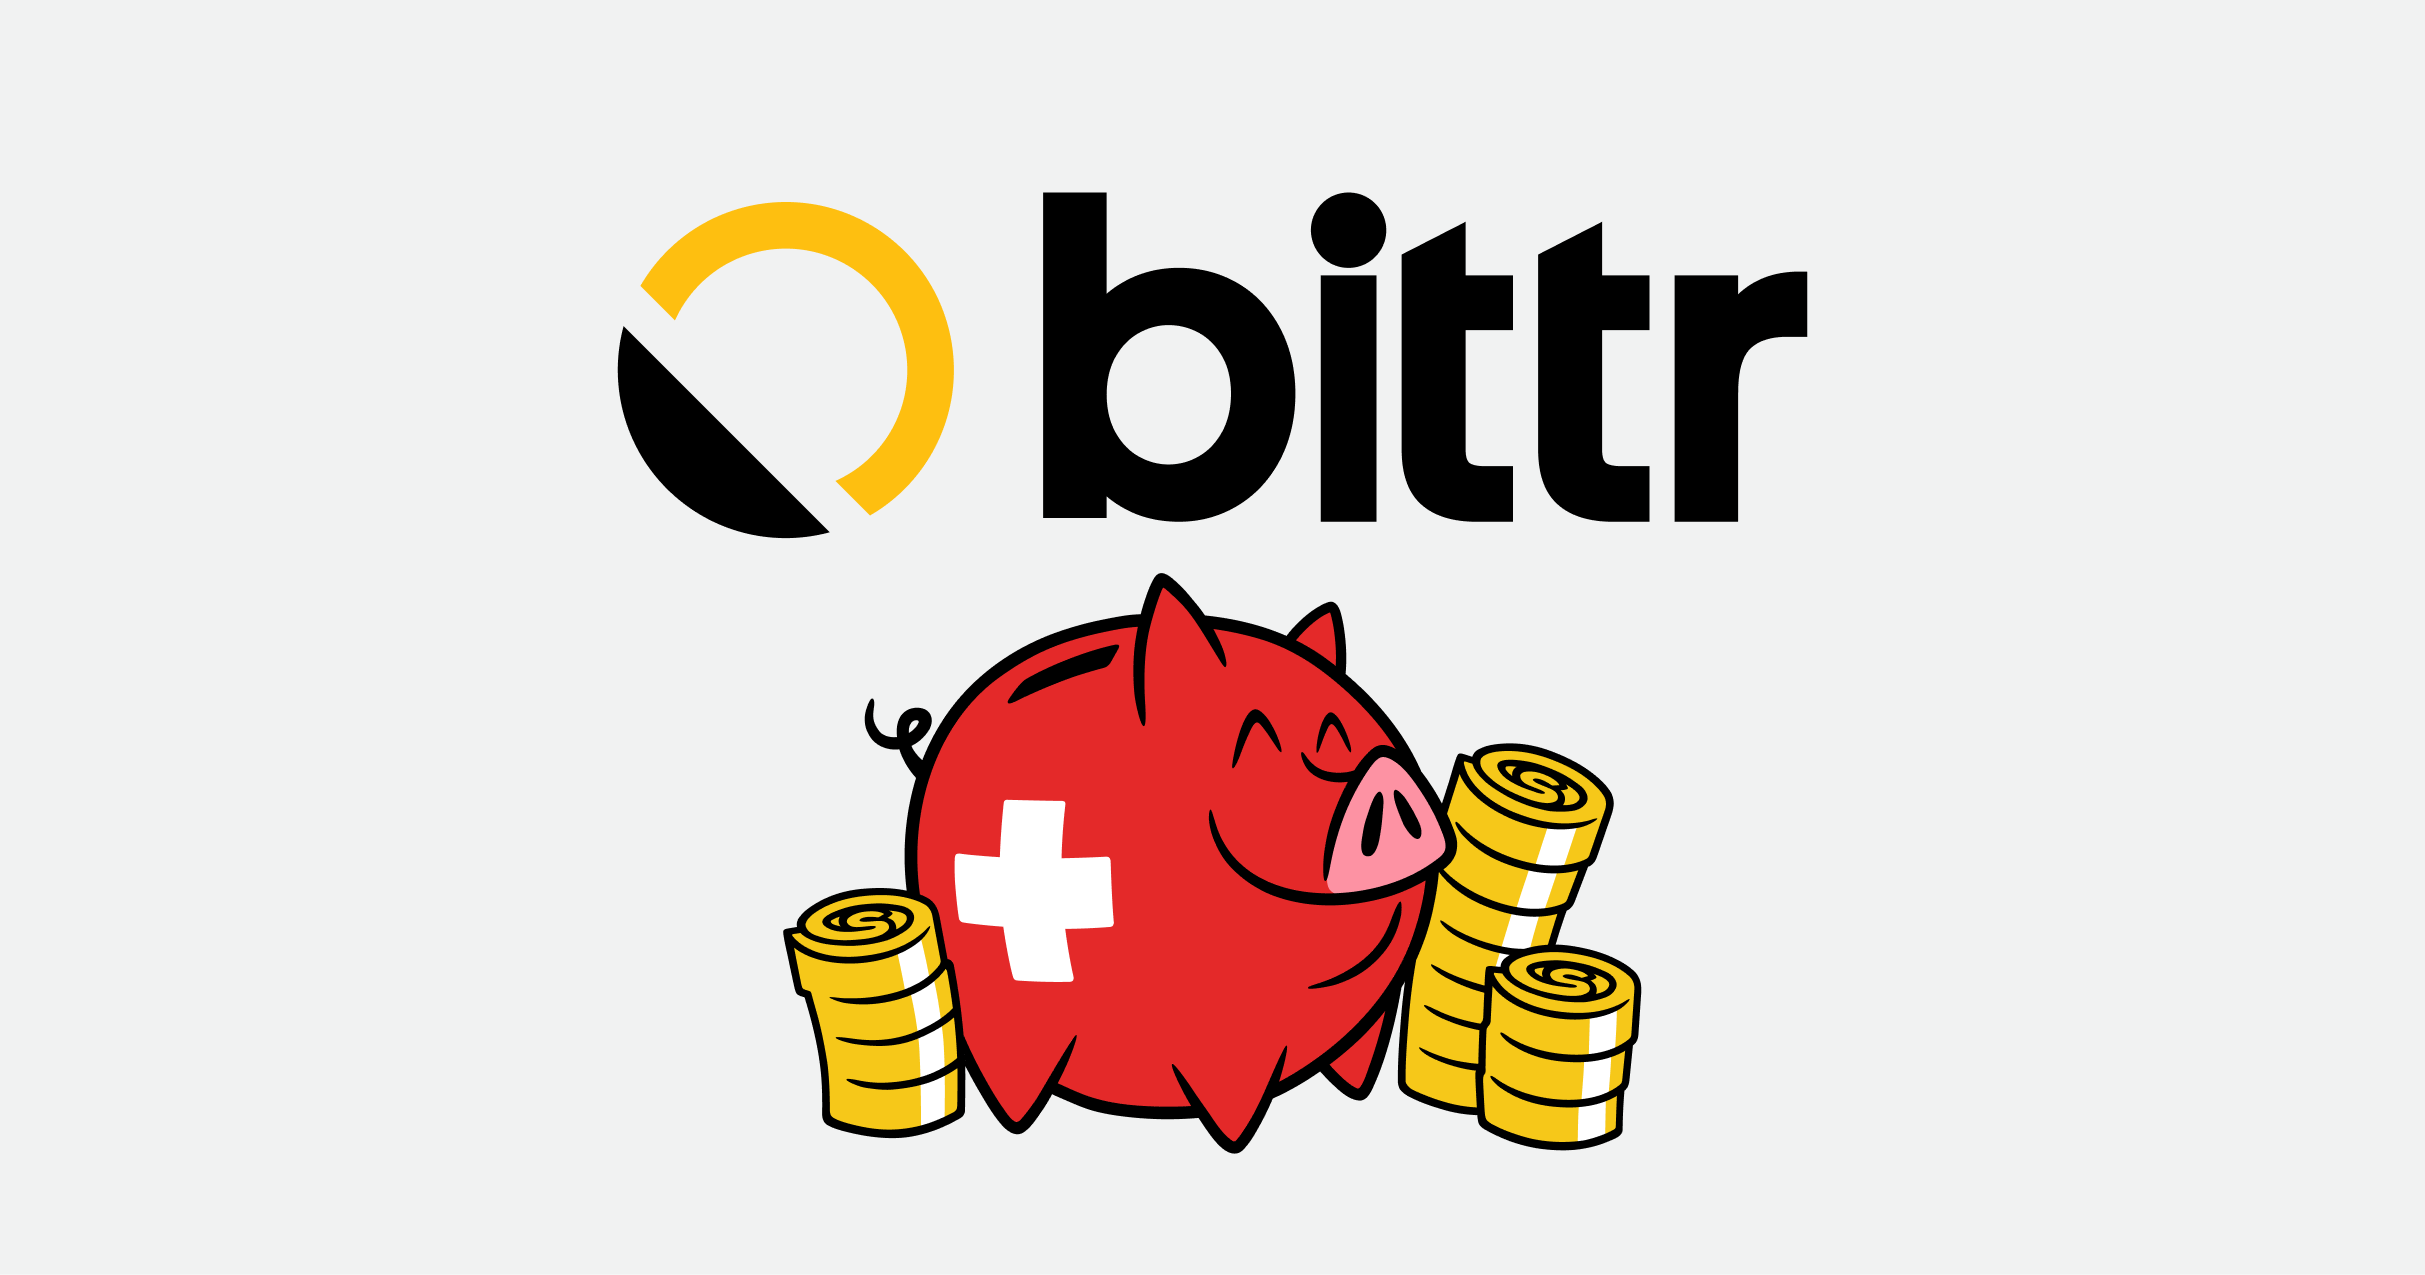 Buy bitcoin with Bittr